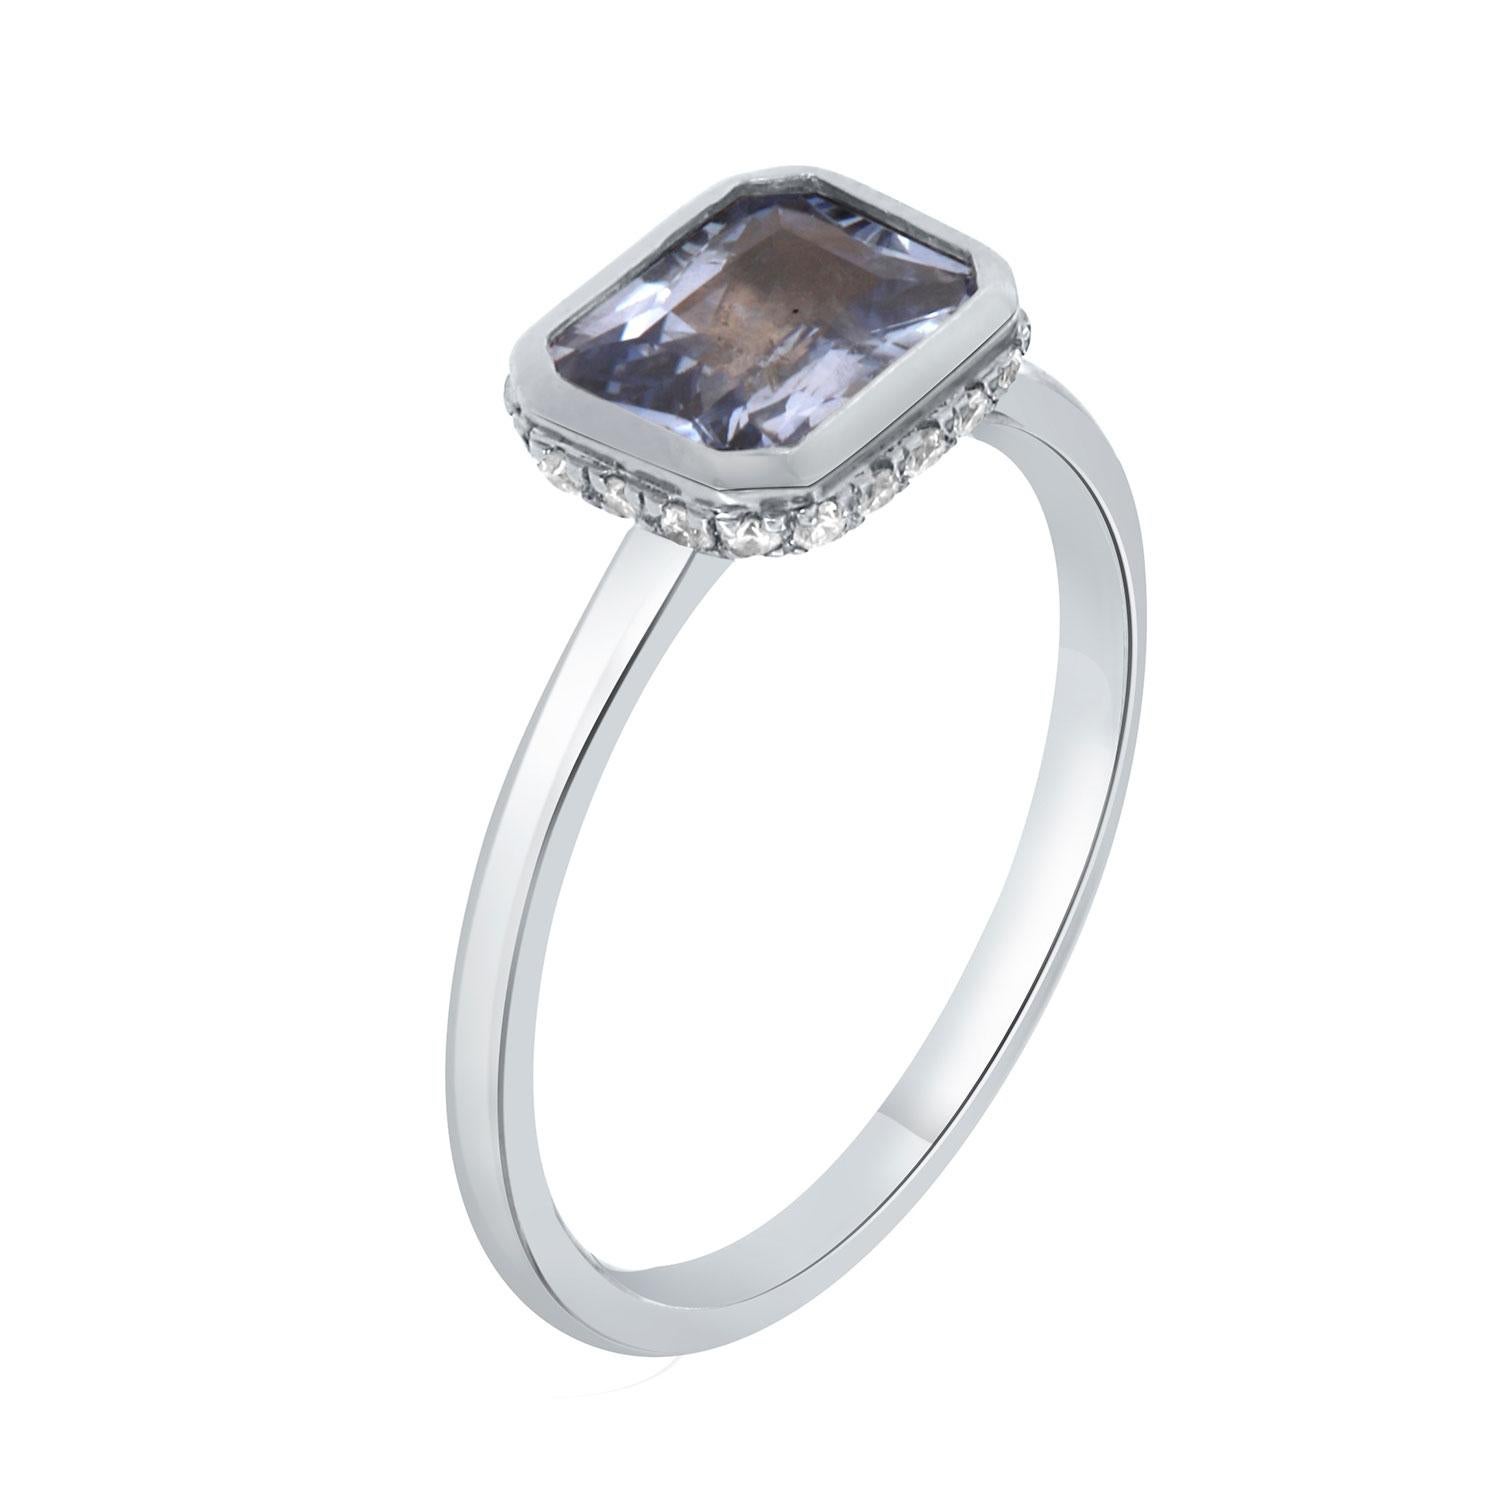 This delicate 18K White gold ring features a GIA-certified 1.36 Carat Octagonal-shaped 